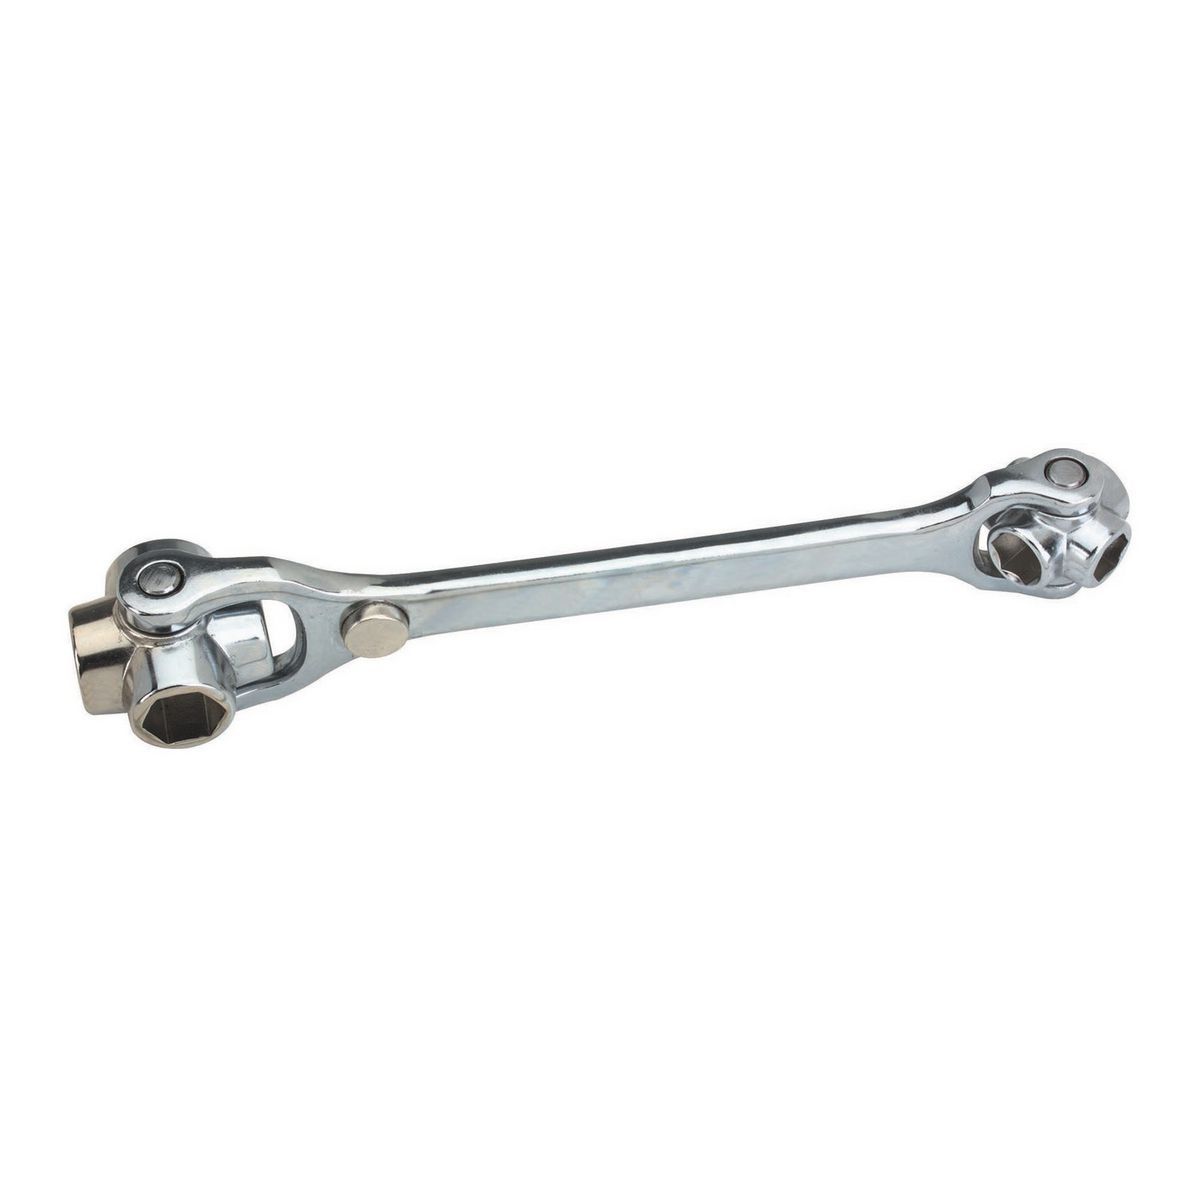 PITTSBURGH 8-In-1 Metric Wrench